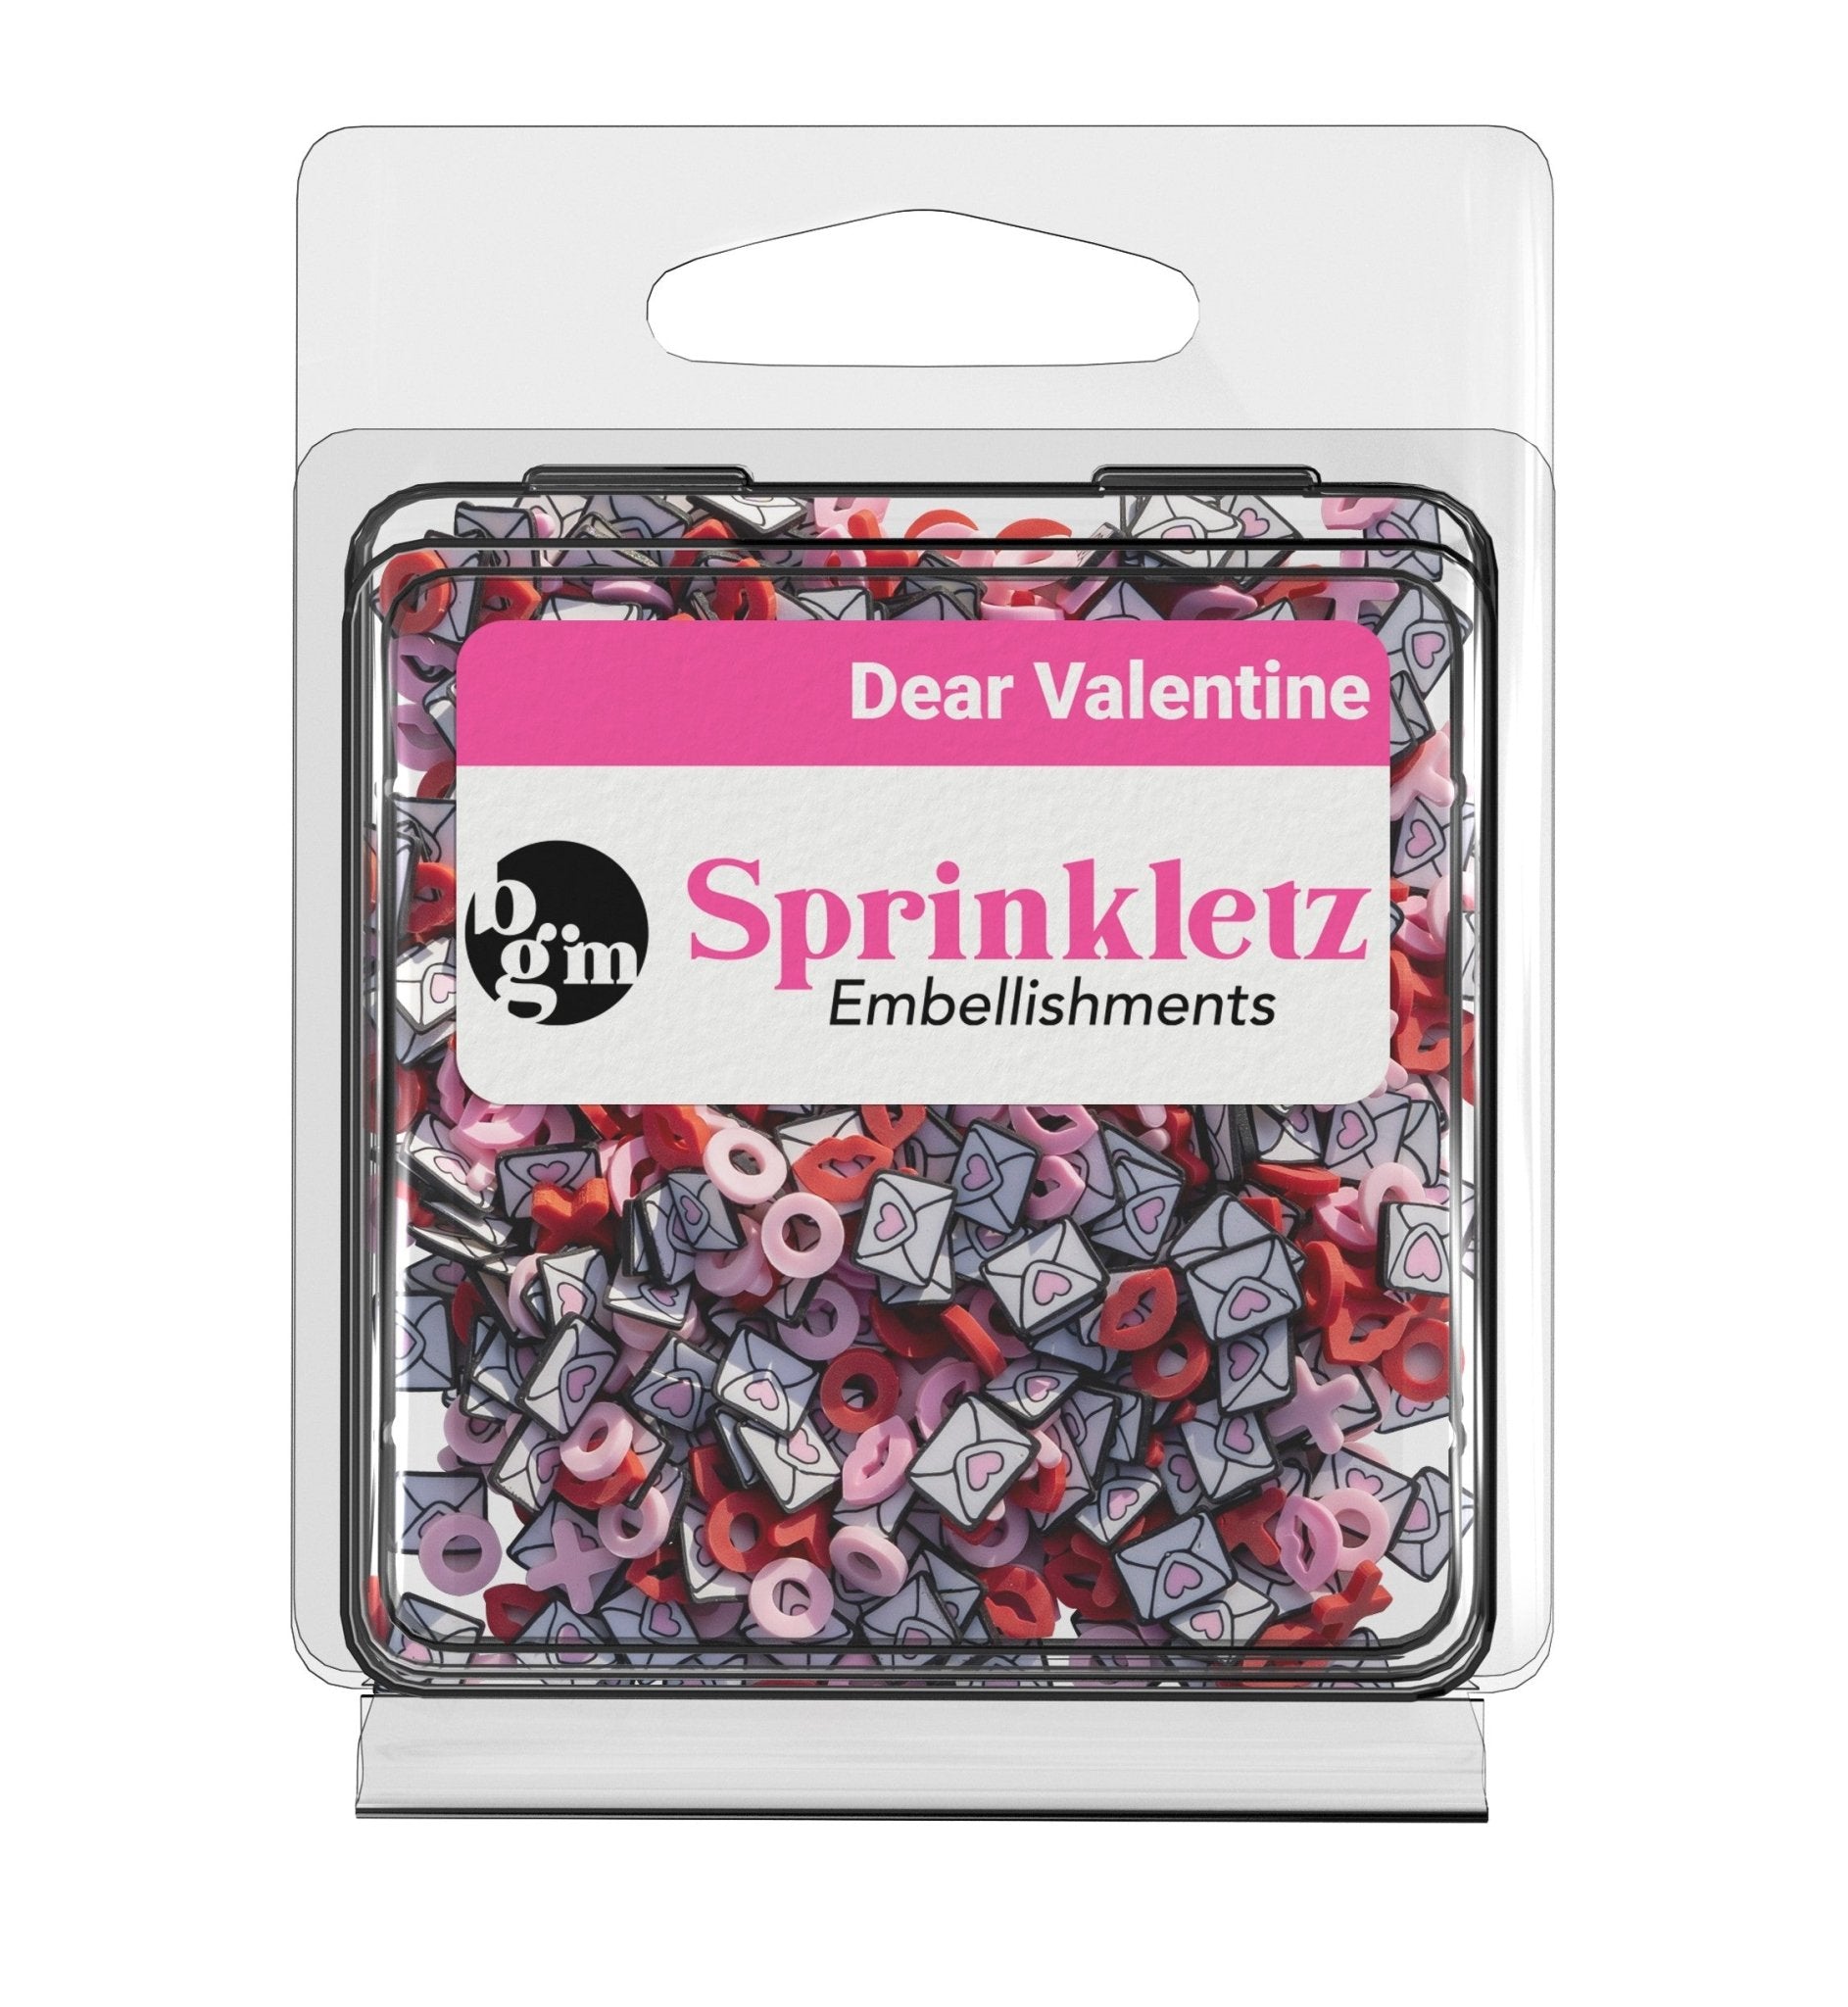 Dear Valentine - Buttons Galore and More